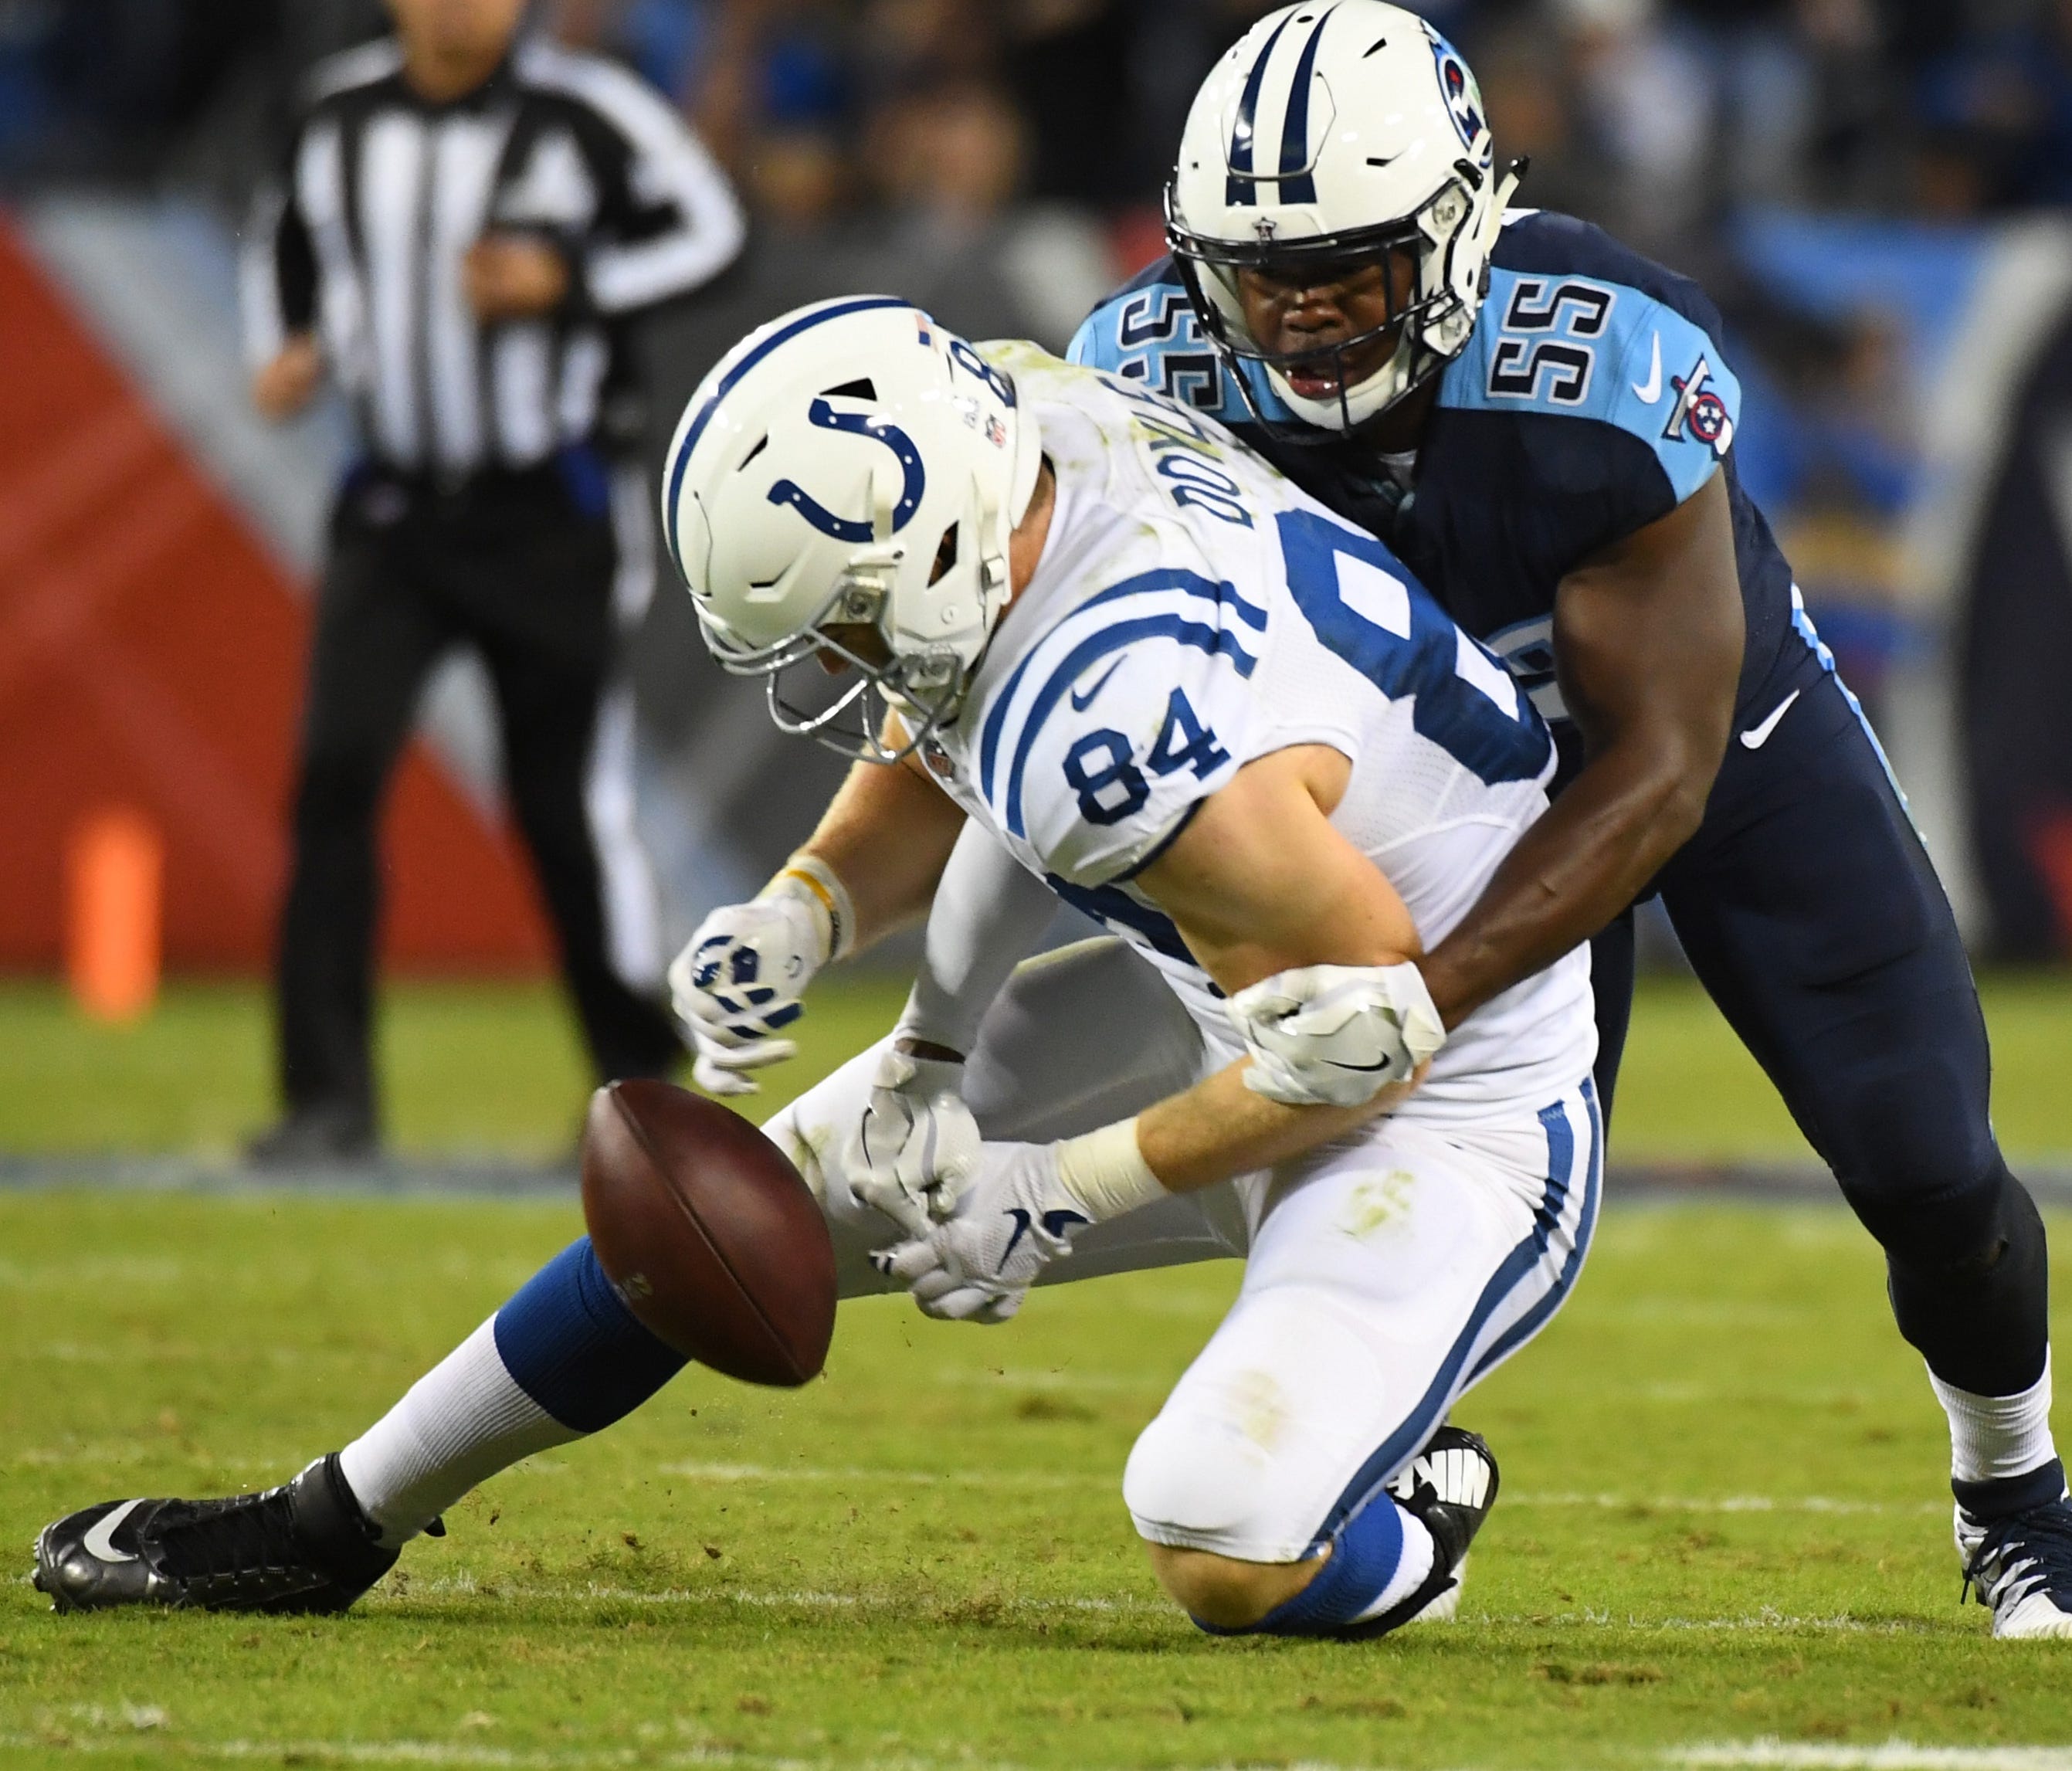 Oct 16, 2017; Nashville, TN, USA; Tennessee Titans linebacker Jayon Brown (55) breaks up a pass intended for Indianapolis Colts tight end Jack Doyle (84) during the second half at Nissan Stadium. Mandatory Credit: Christopher Hanewinckel-USA TODAY Sp